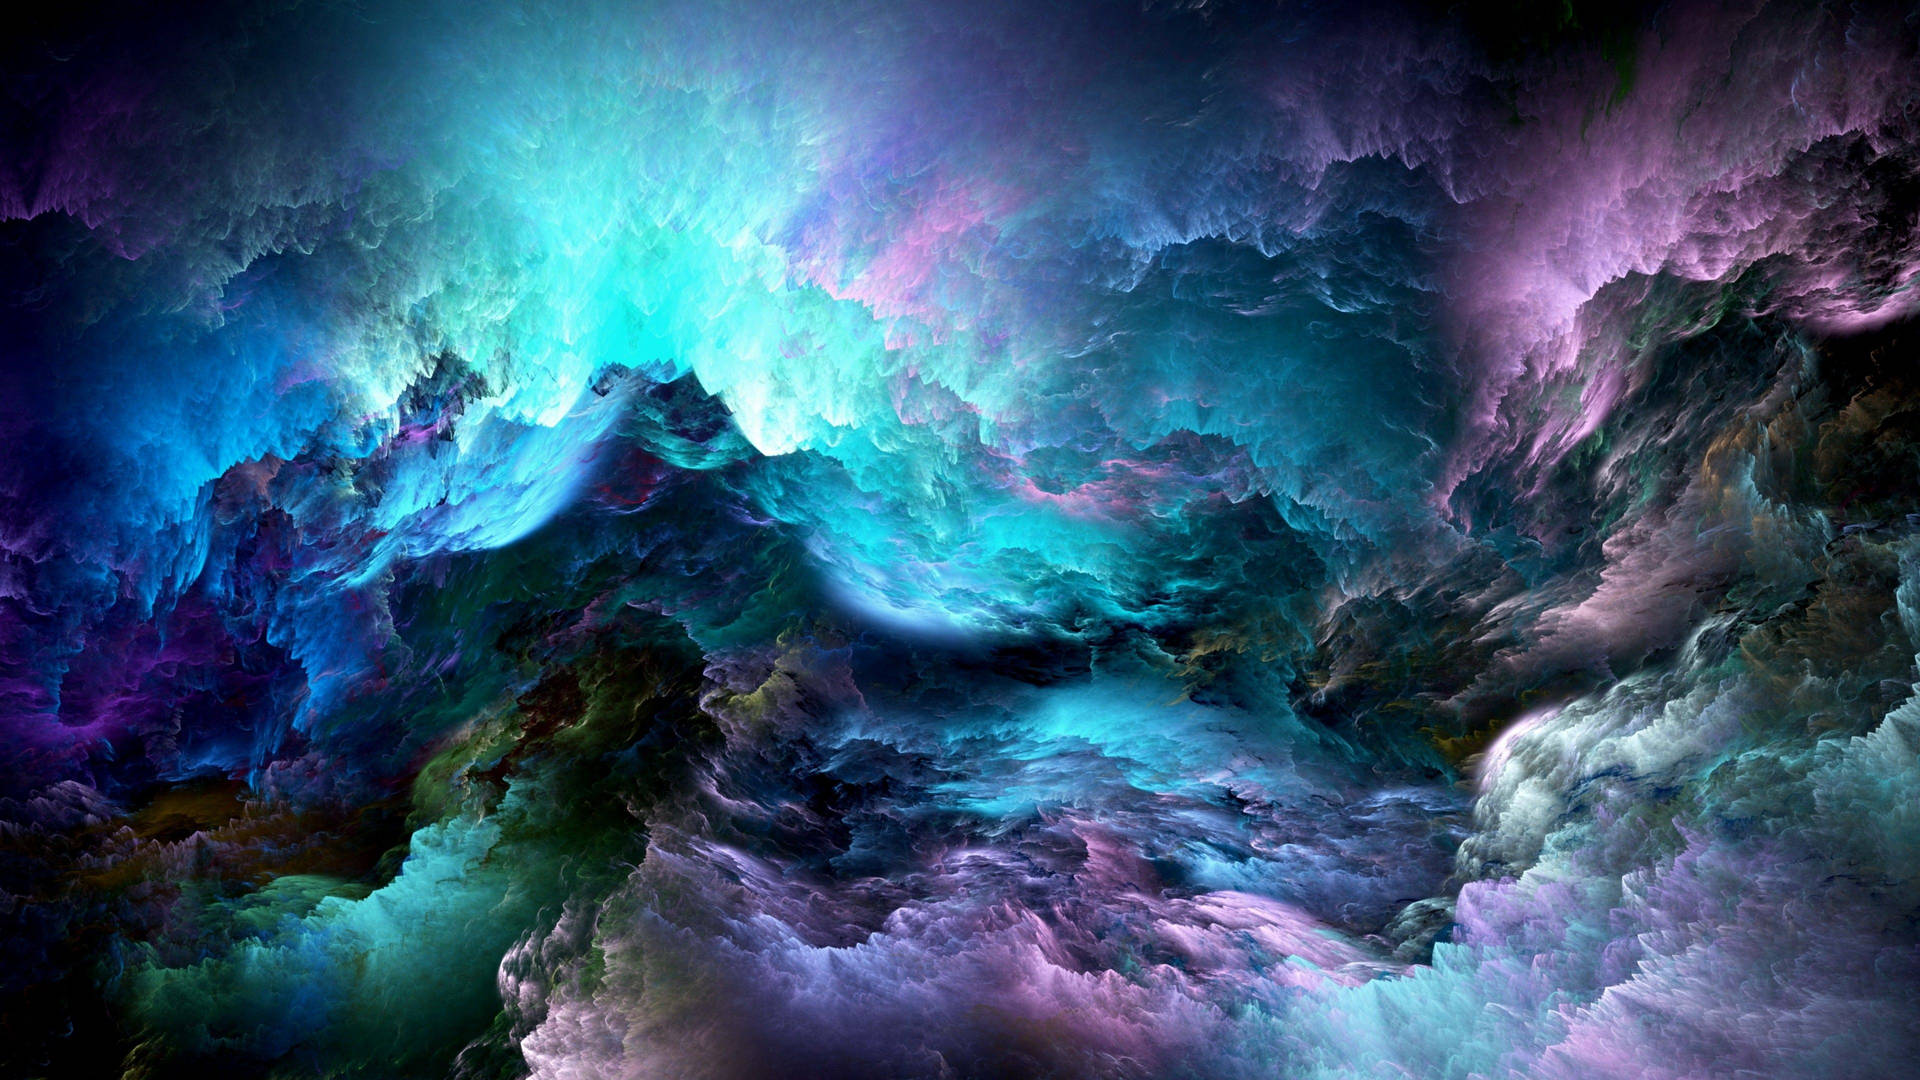 Abstract Computer Wallpapers